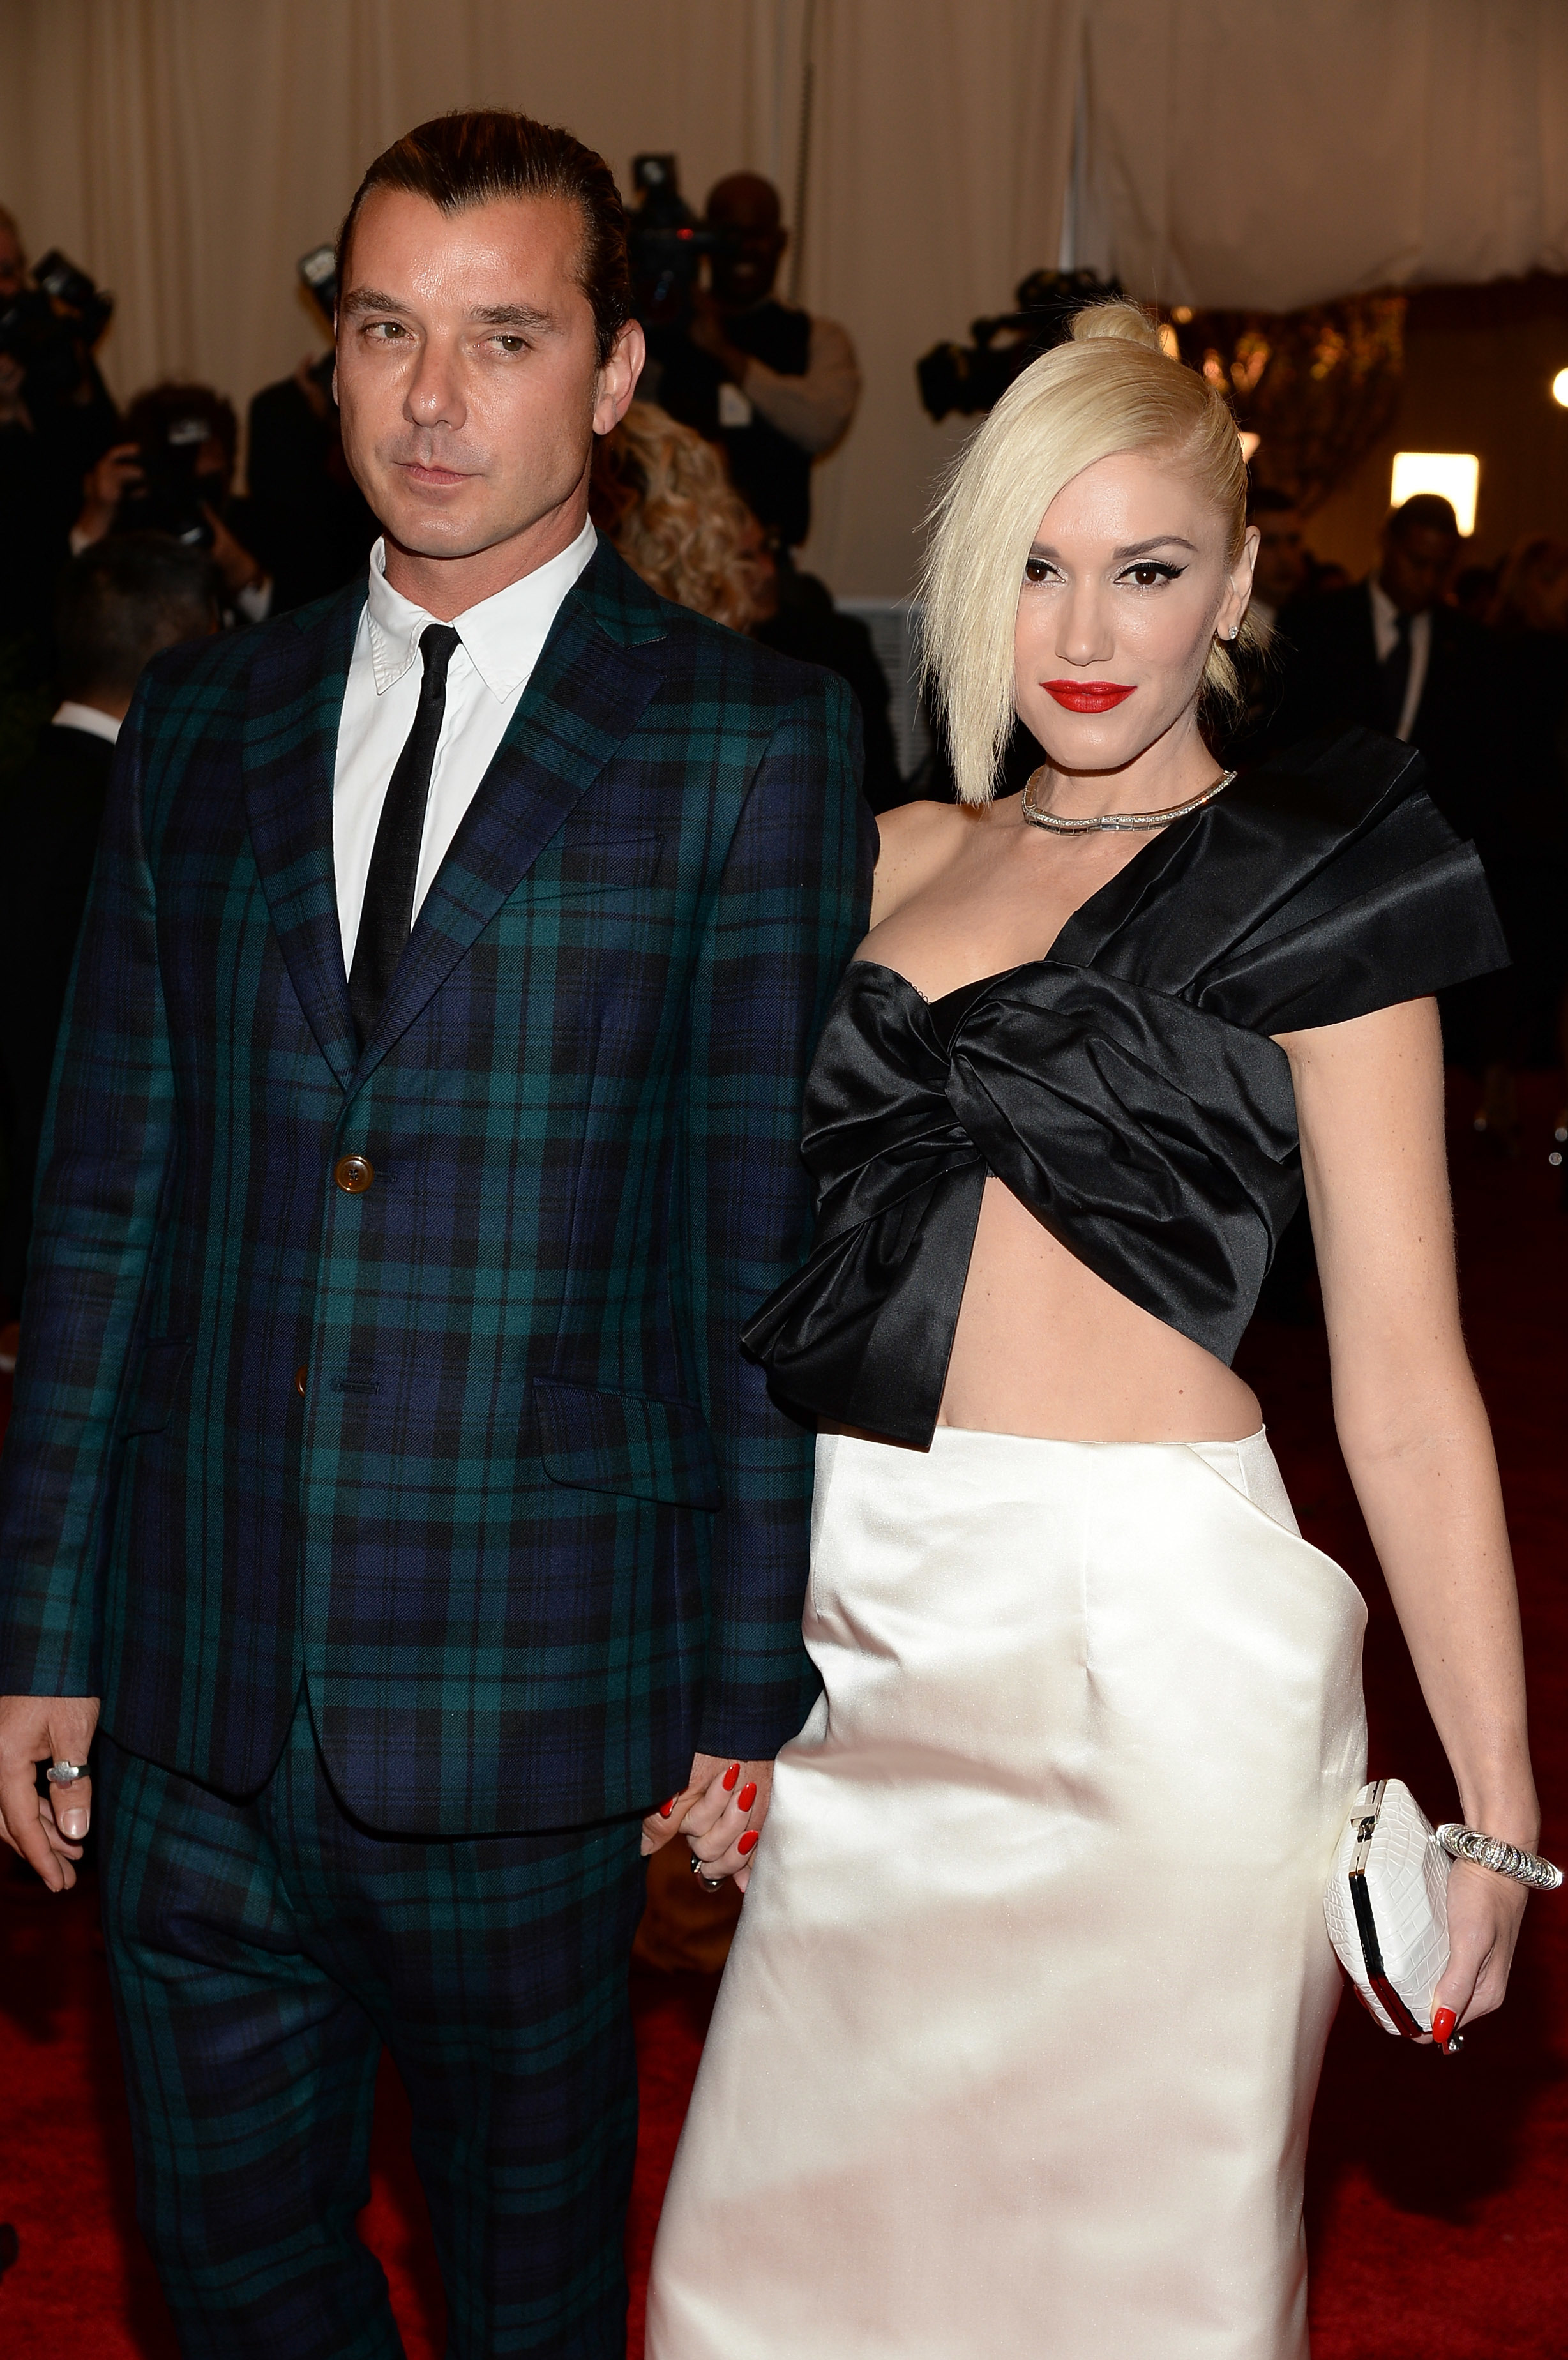 <p><a href="https://www.wonderwall.com/celebrity/profiles/overview/gwen-stefani-287.article">Gwen Stefani</a> and former hubby <a href="https://www.wonderwall.com/celebrity/profiles/overview/gavin-rossdale-841.article">Gavin Rossdale</a> seemed like a match made in rock-star heaven when they married in September 2002. Things came crashing down, however, when Gavin was accused of having a three-year affair with family nanny Mindy Mann. Gwen, who channeled her heartbreak into a new album, filed for divorce in August 2015 and has since found love with fellow "The Voice" coach Blake Shelton.</p>